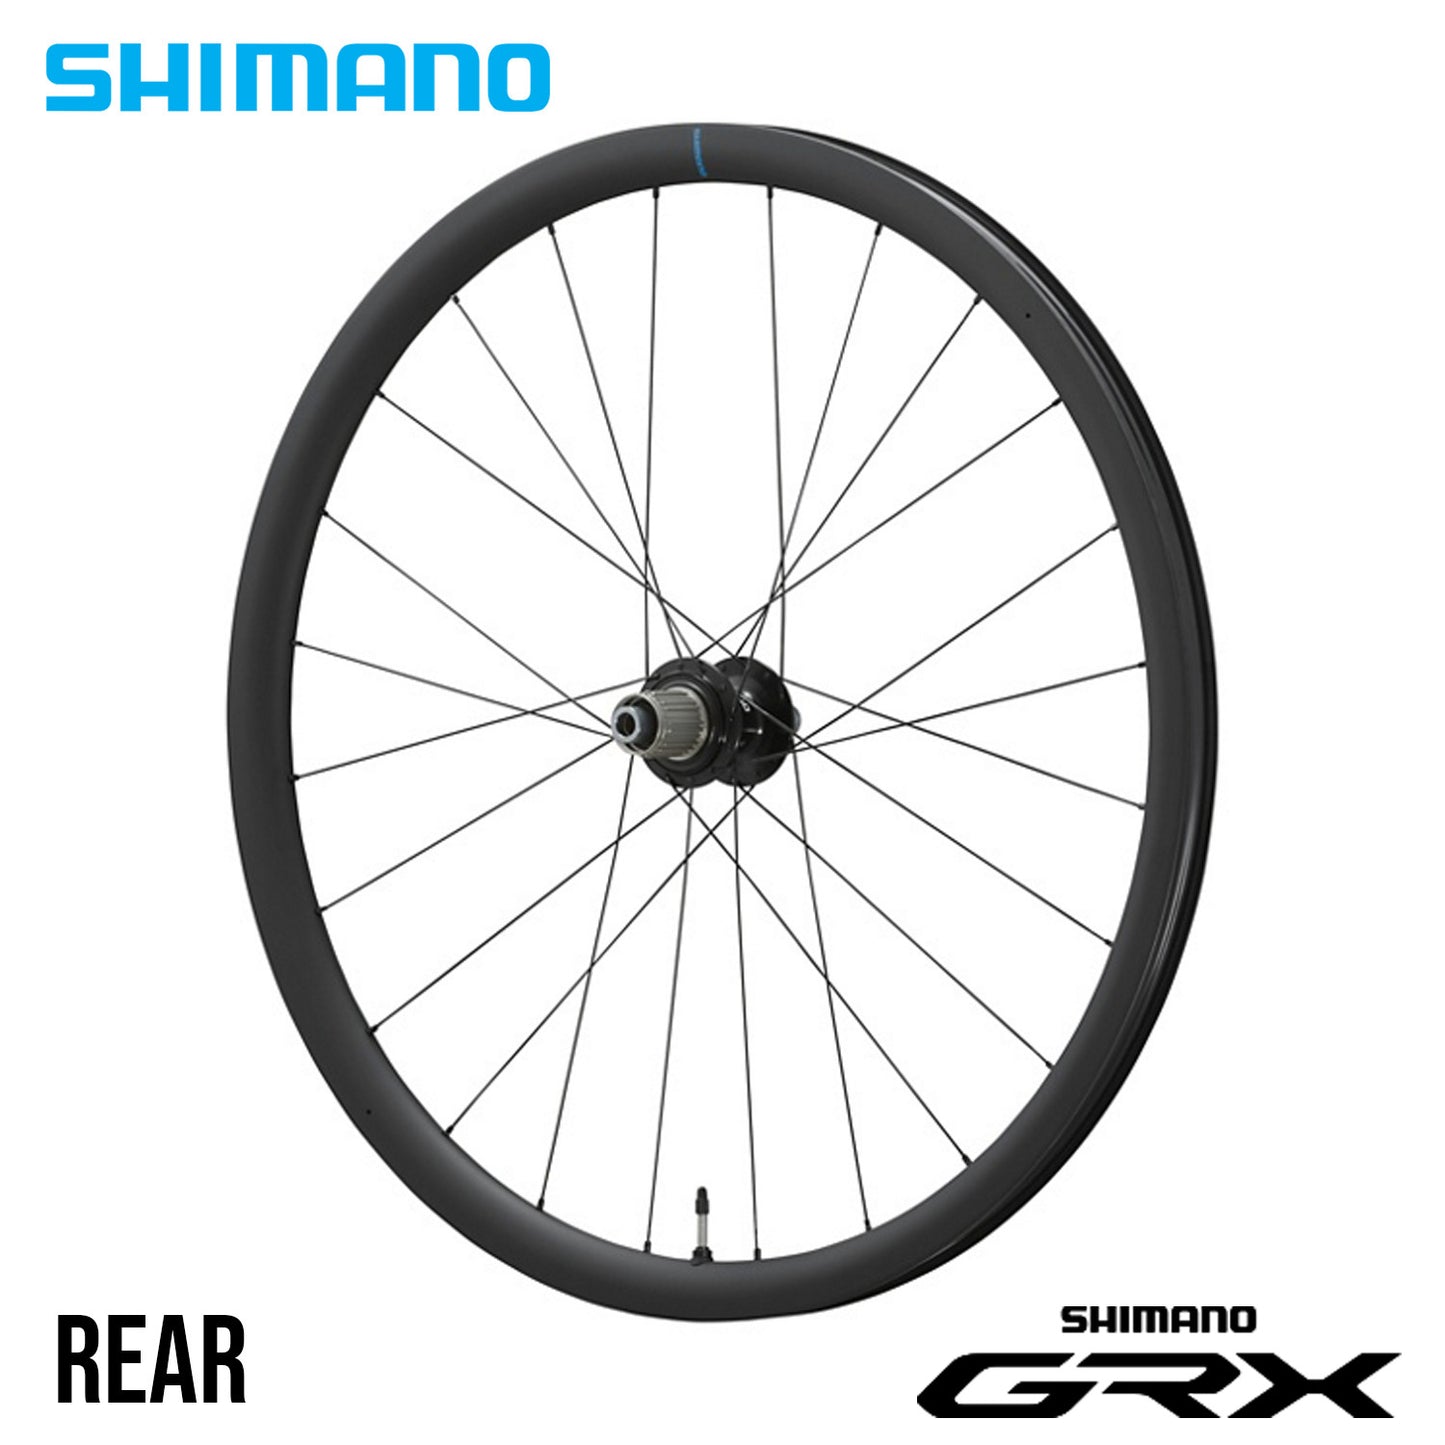 Shimano GRX WH-RX880-700C Gravel Microspline Carbon Tubeless Disc Wheelset Front and Rear 1394g